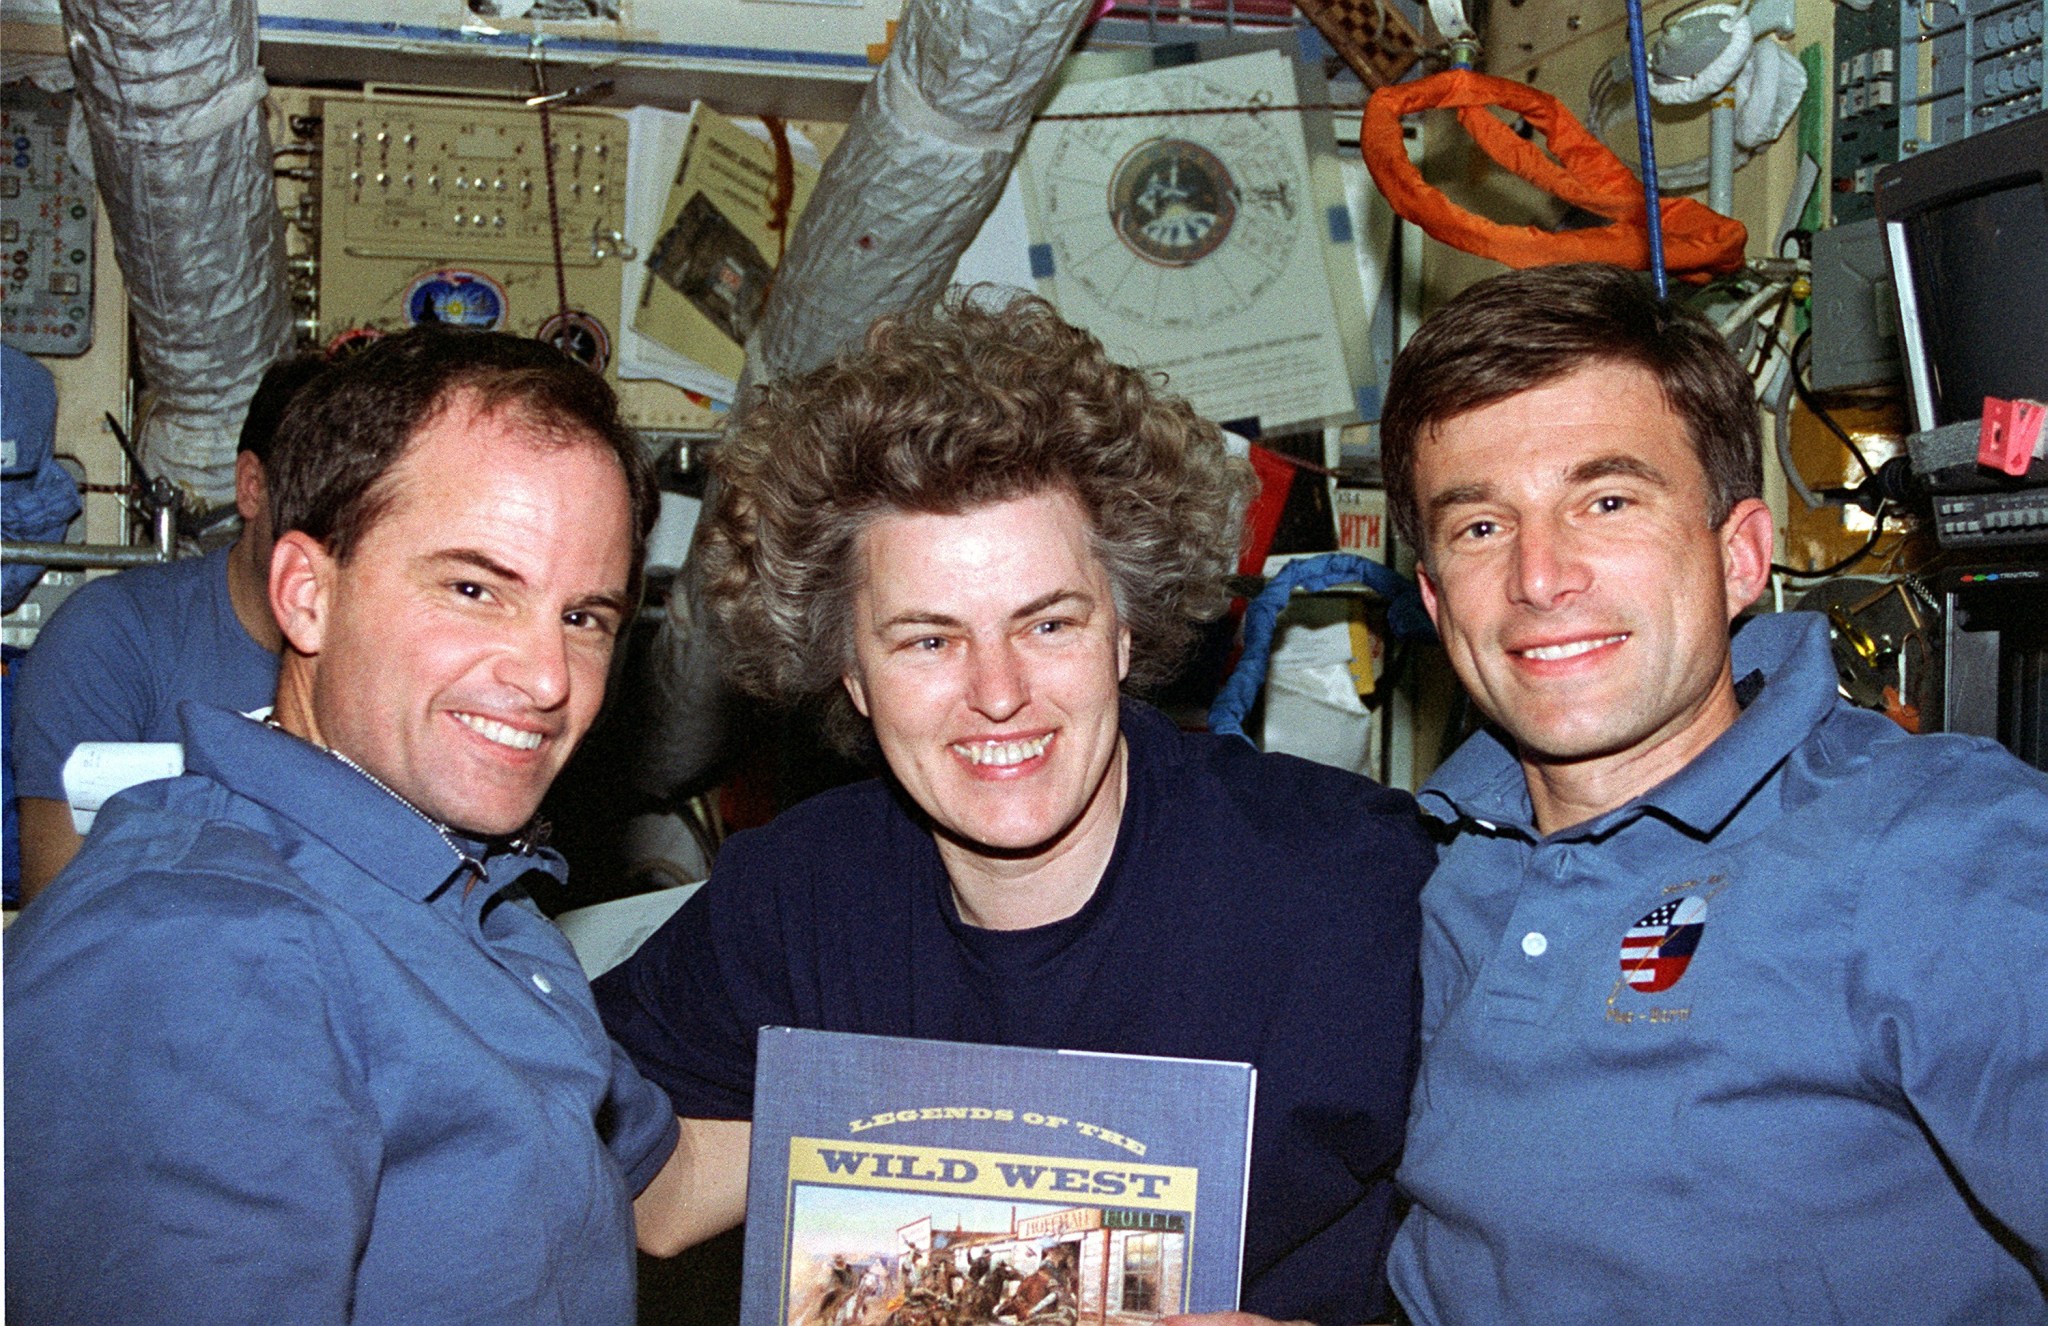 STS-76 Commander Kevin Chilton and Mission Specialist Ron Sega present a book, "Legends of the Wild West", to the new Mir 21 crewmember Shannon Lucid.